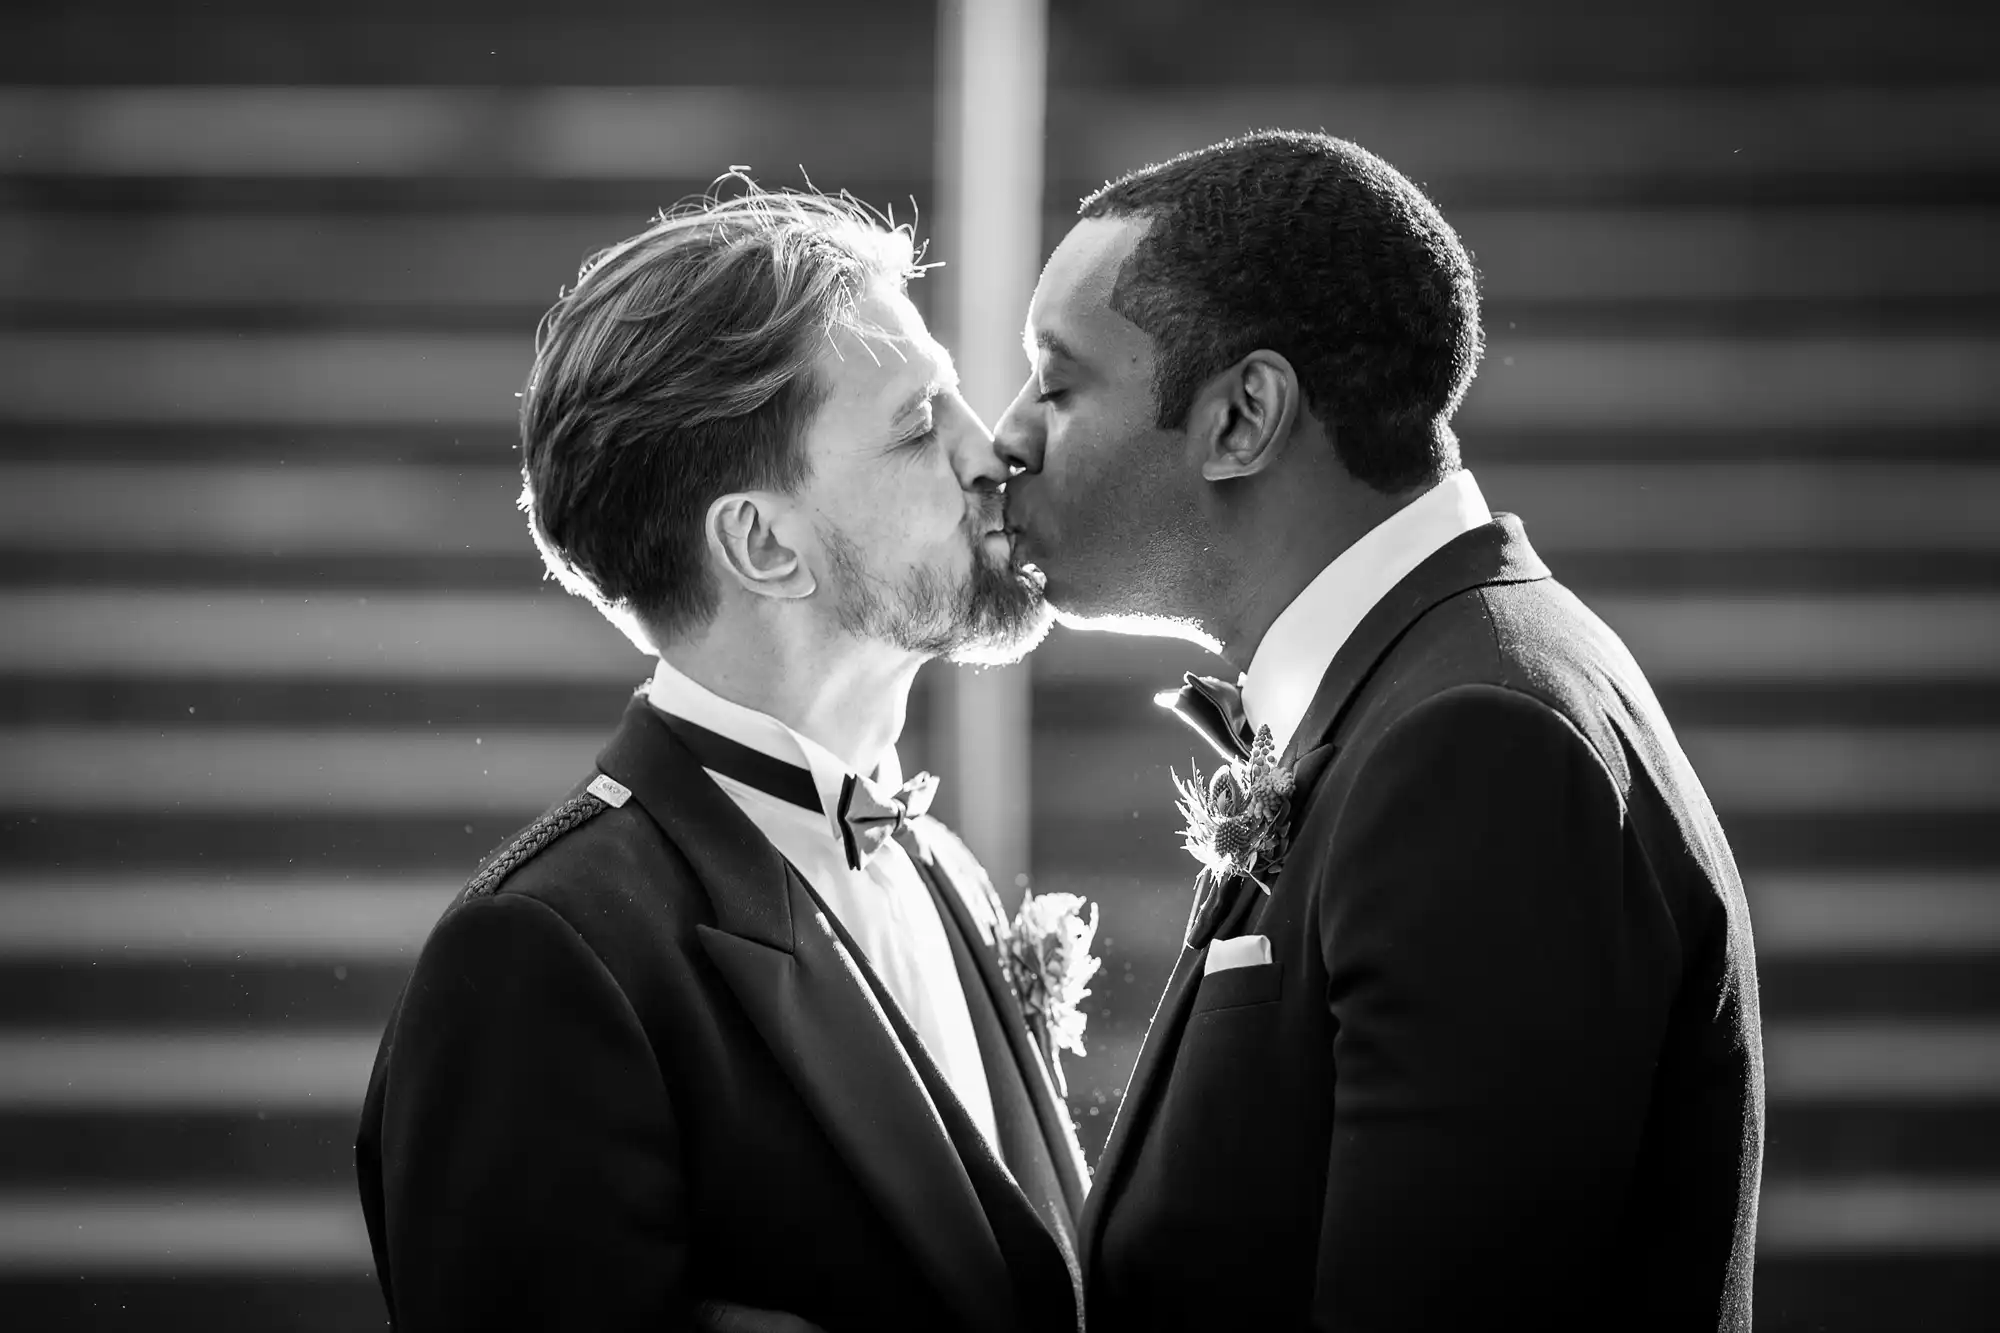 Two men in tuxedos sharing a kiss in front of a staircase. Both are wearing boutonnières.